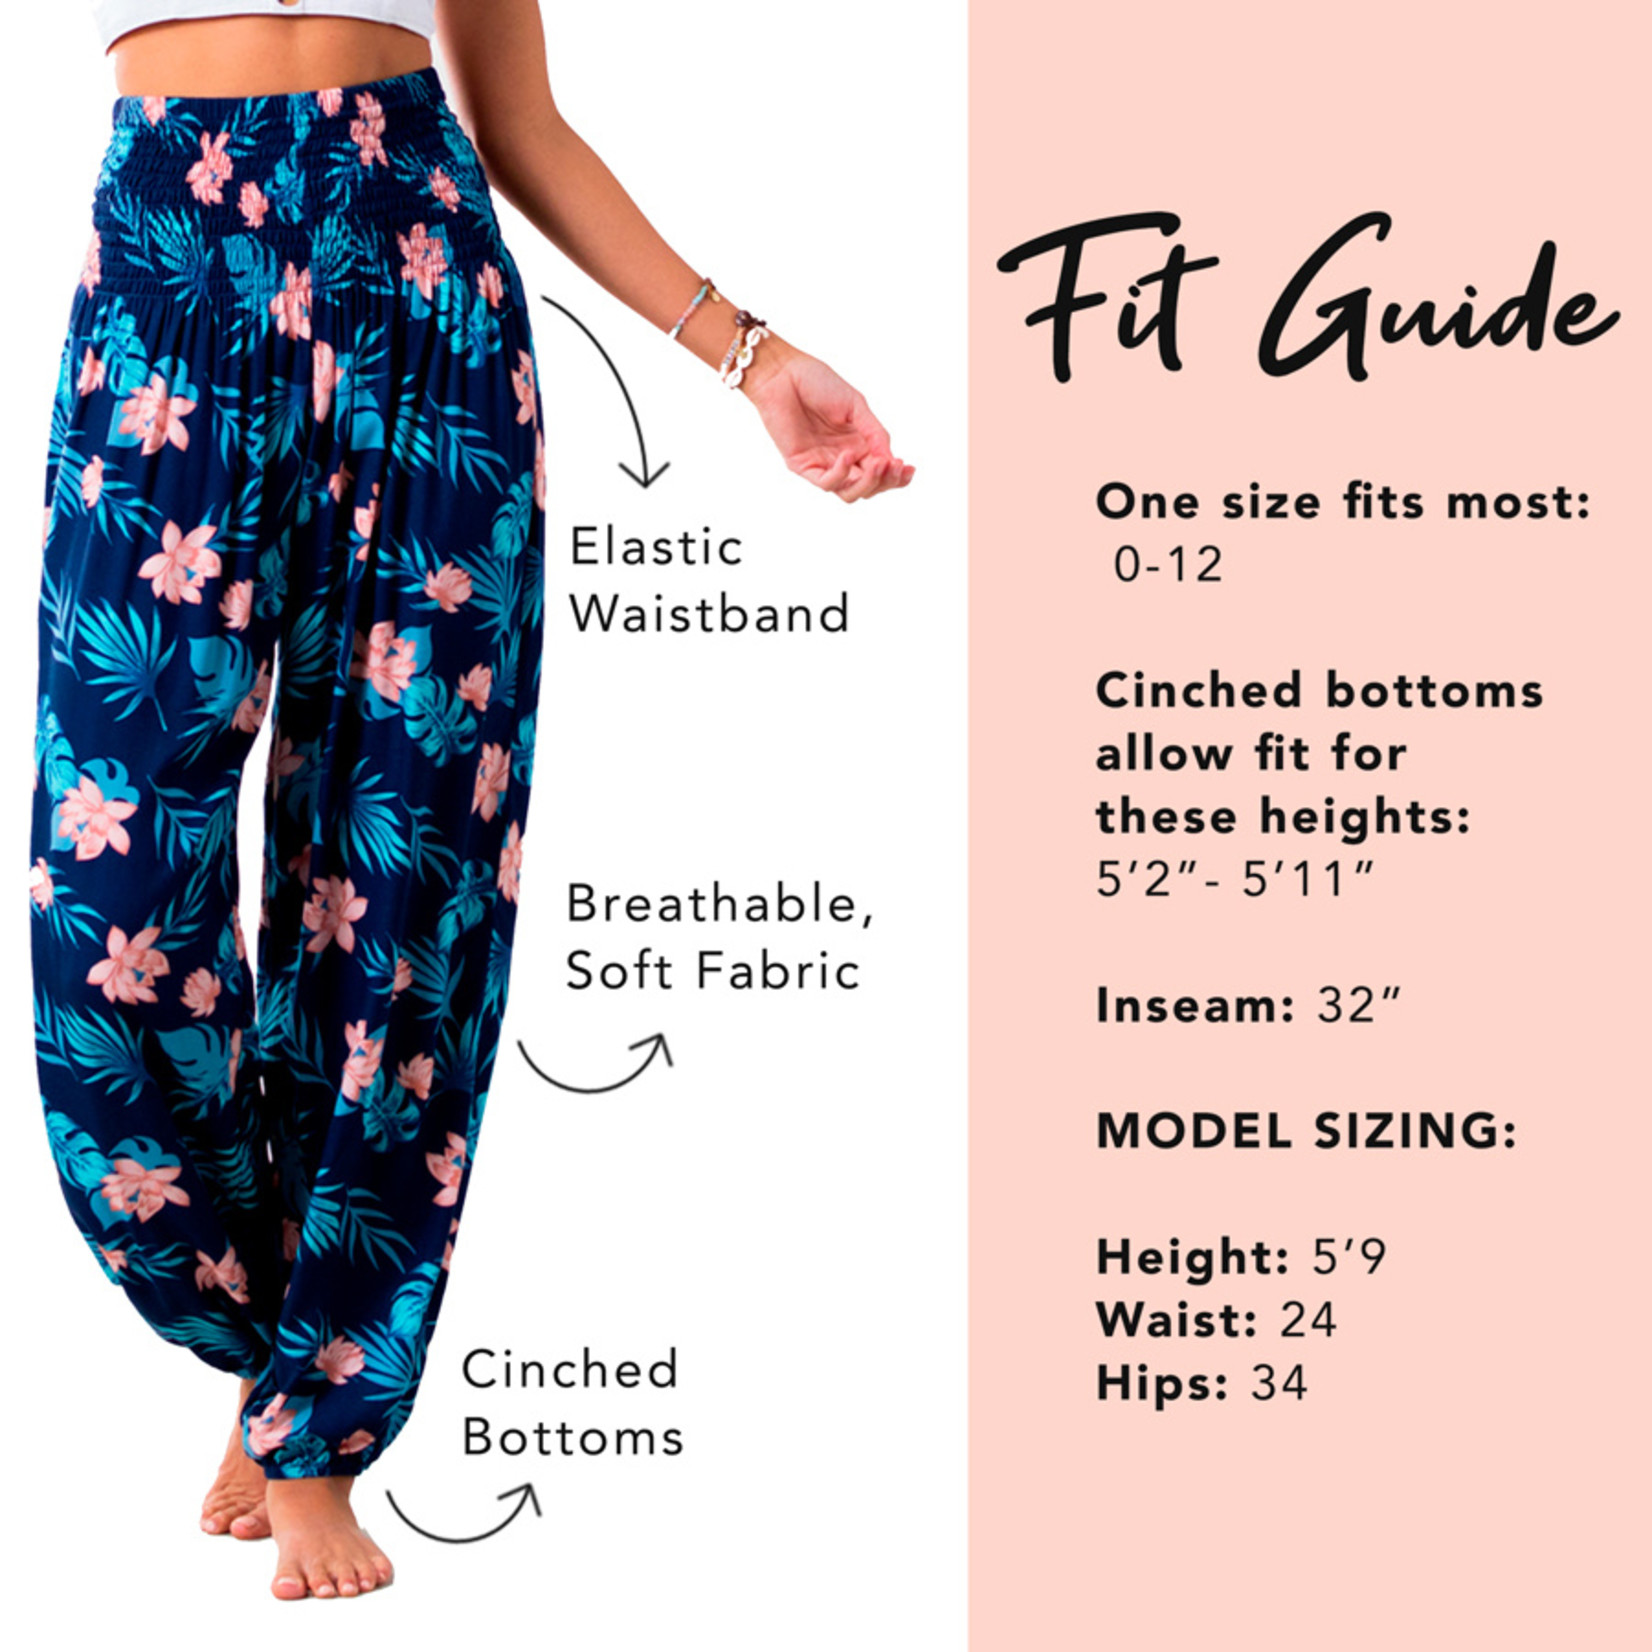 Types of Harem Pants and Best Ideas to Style Them, by Bernice nosalus